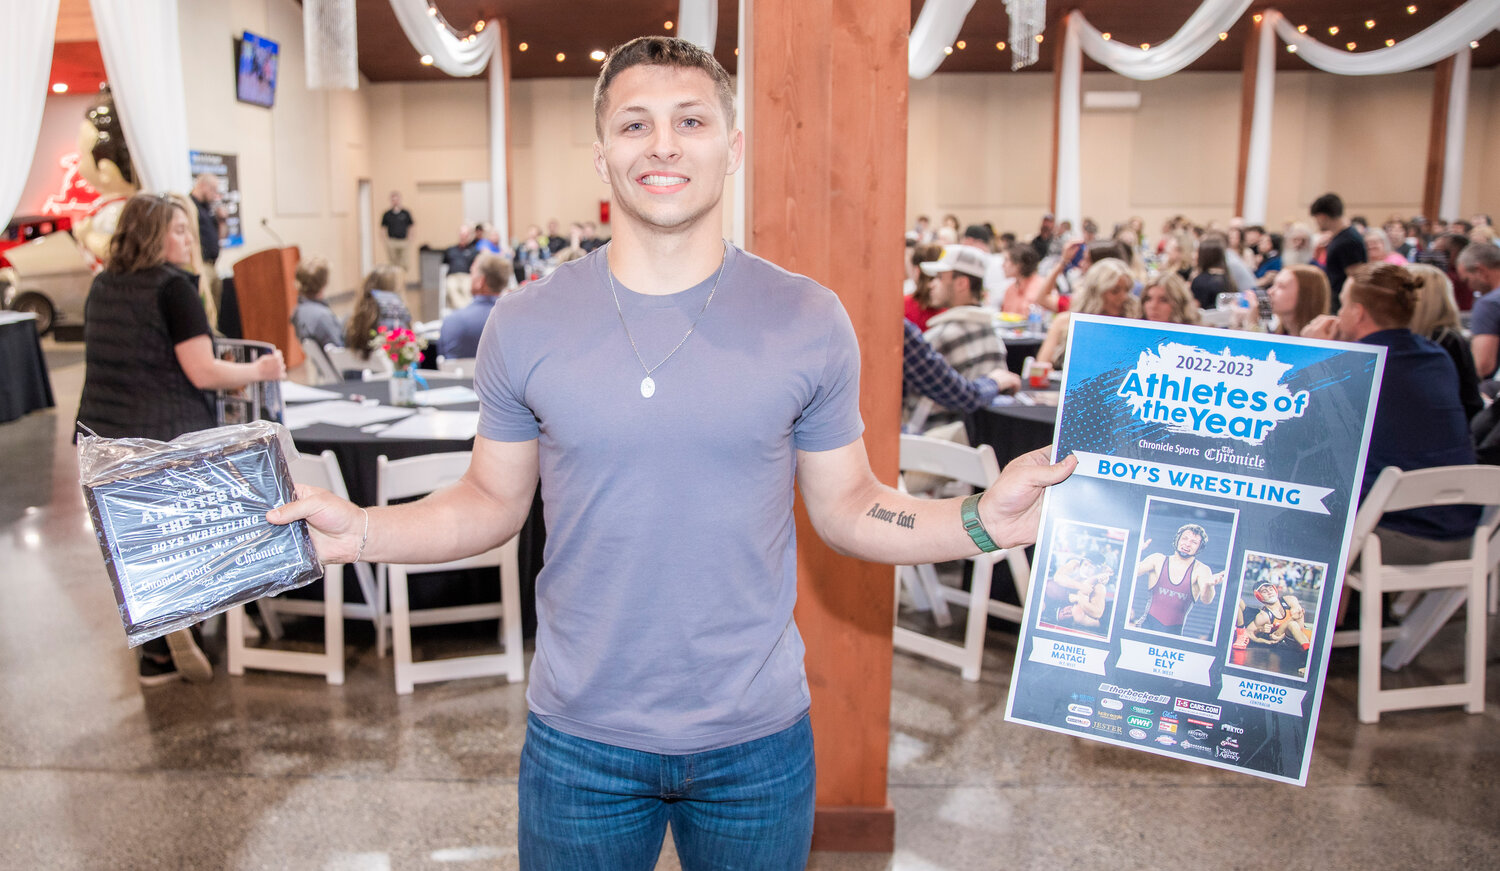 W.F. West’s wrestling MVP Blake Ely smiles for a photo Tuesday evening during the “Athletes of the Year” banquet at the Jester Auto Museum. Ely wrapped up his W.F. West career on the mat with a perfect 34-0 record, finishing things off with one last pin in the State title bout at 145 pounds.